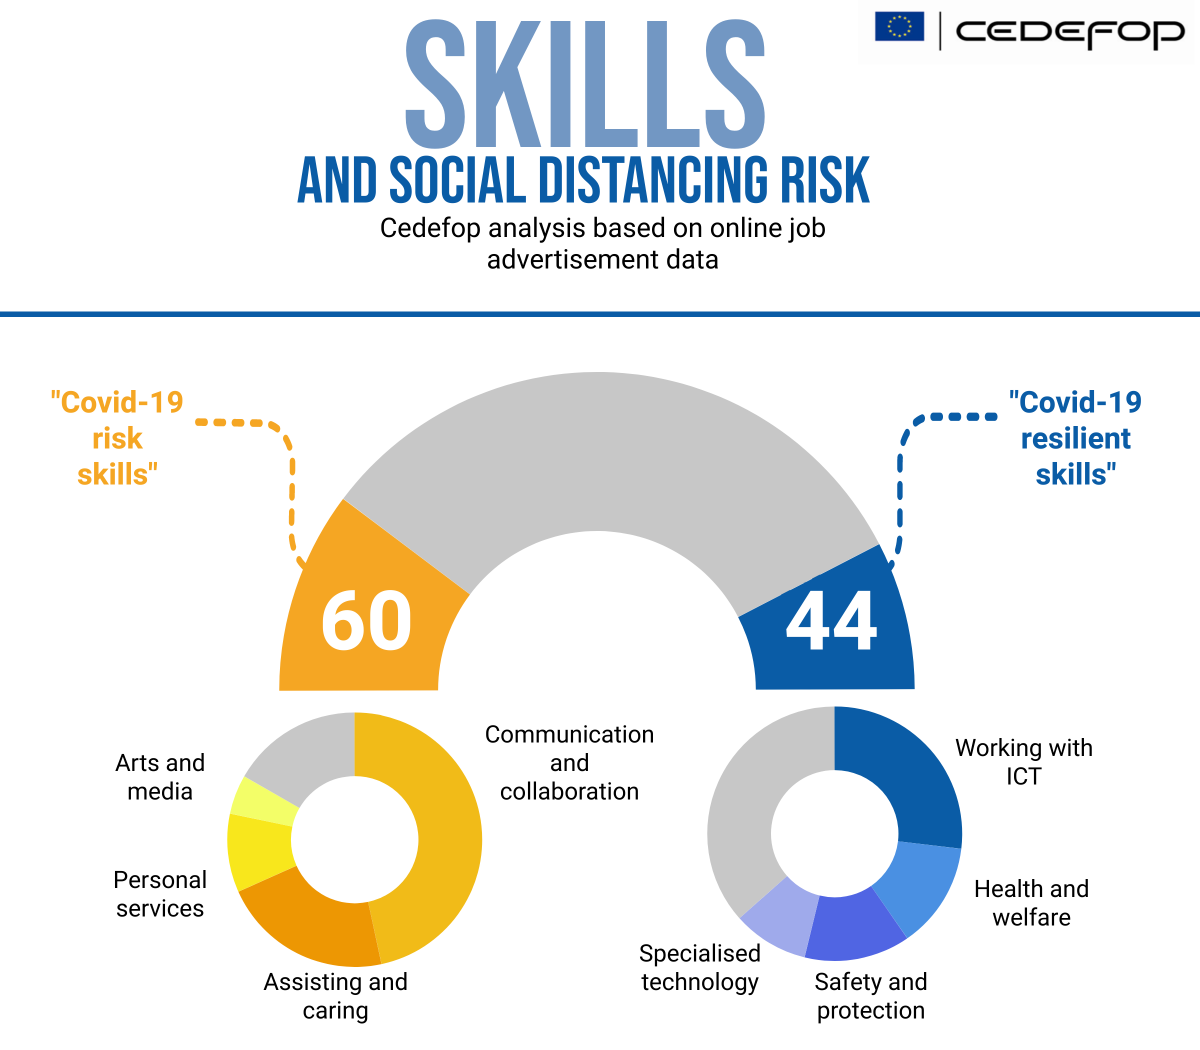 Skills and social distancing risk - Cedefop analysis based on online job advertisement data